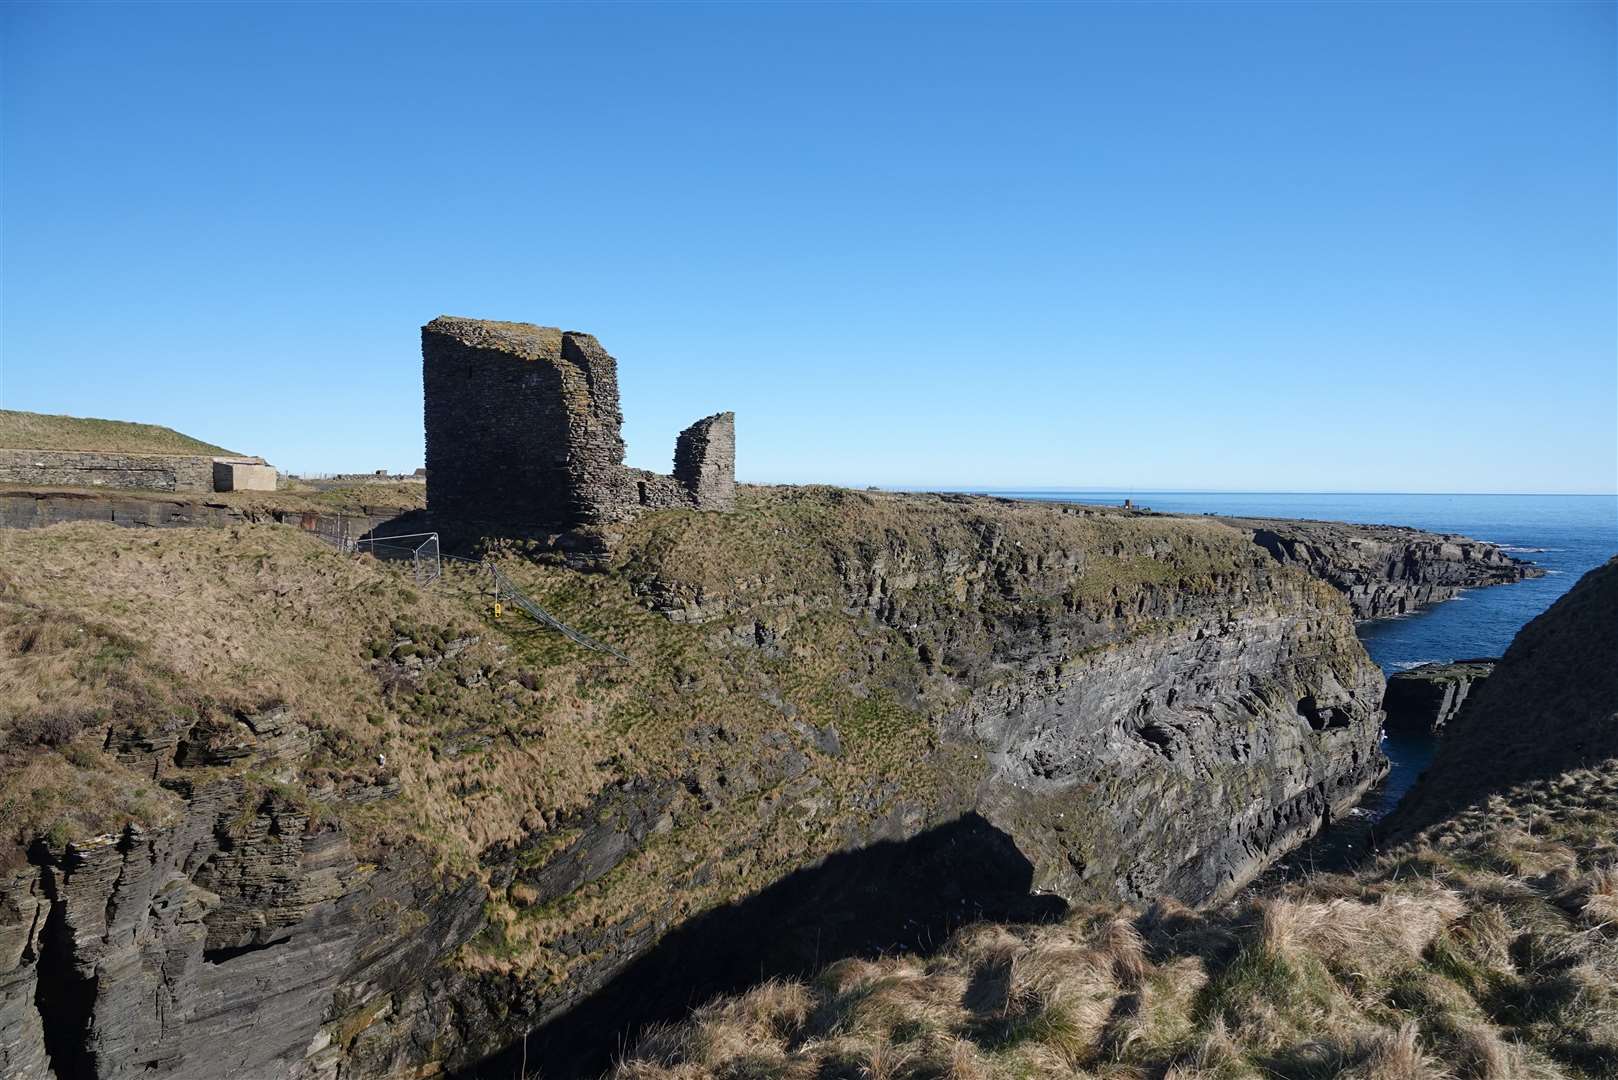 YOUR CAITHNESS: Reader Derek Bremner sent this image of Old Wick Castle this week and wonders when it will reopen again.